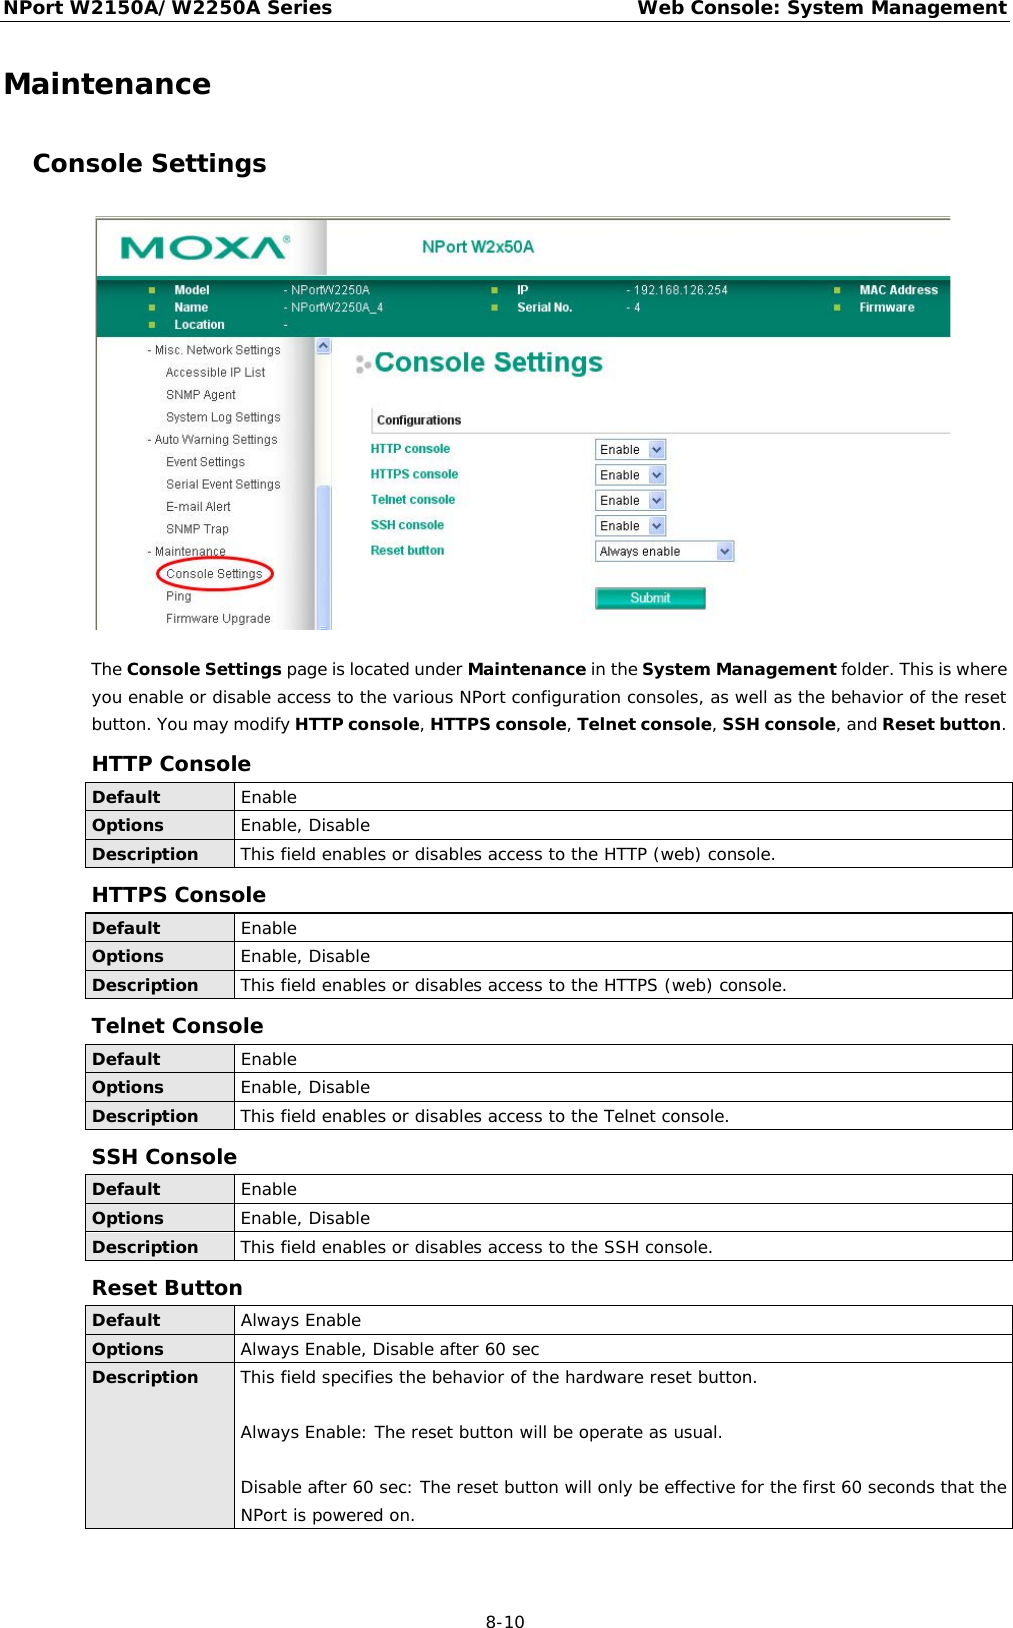 NPort W2150A/W2250A Series Web Console: System Management  8-10 Maintenance Console Settings  The Console Settings page is located under Maintenance in the System Management folder. This is where you enable or disable access to the various NPort configuration consoles, as well as the behavior of the reset button. You may modify HTTP console, HTTPS console, Telnet console, SSH console, and Reset button. HTTP Console Default Enable Options Enable, Disable Description This field enables or disables access to the HTTP (web) console. HTTPS Console Default Enable Options Enable, Disable Description This field enables or disables access to the HTTPS (web) console. Telnet Console Default Enable Options Enable, Disable Description This field enables or disables access to the Telnet console. SSH Console Default Enable Options Enable, Disable Description This field enables or disables access to the SSH console. Reset Button Default Always Enable Options Always Enable, Disable after 60 sec Description This field specifies the behavior of the hardware reset button.  Always Enable: The reset button will be operate as usual.  Disable after 60 sec: The reset button will only be effective for the first 60 seconds that the NPort is powered on. 